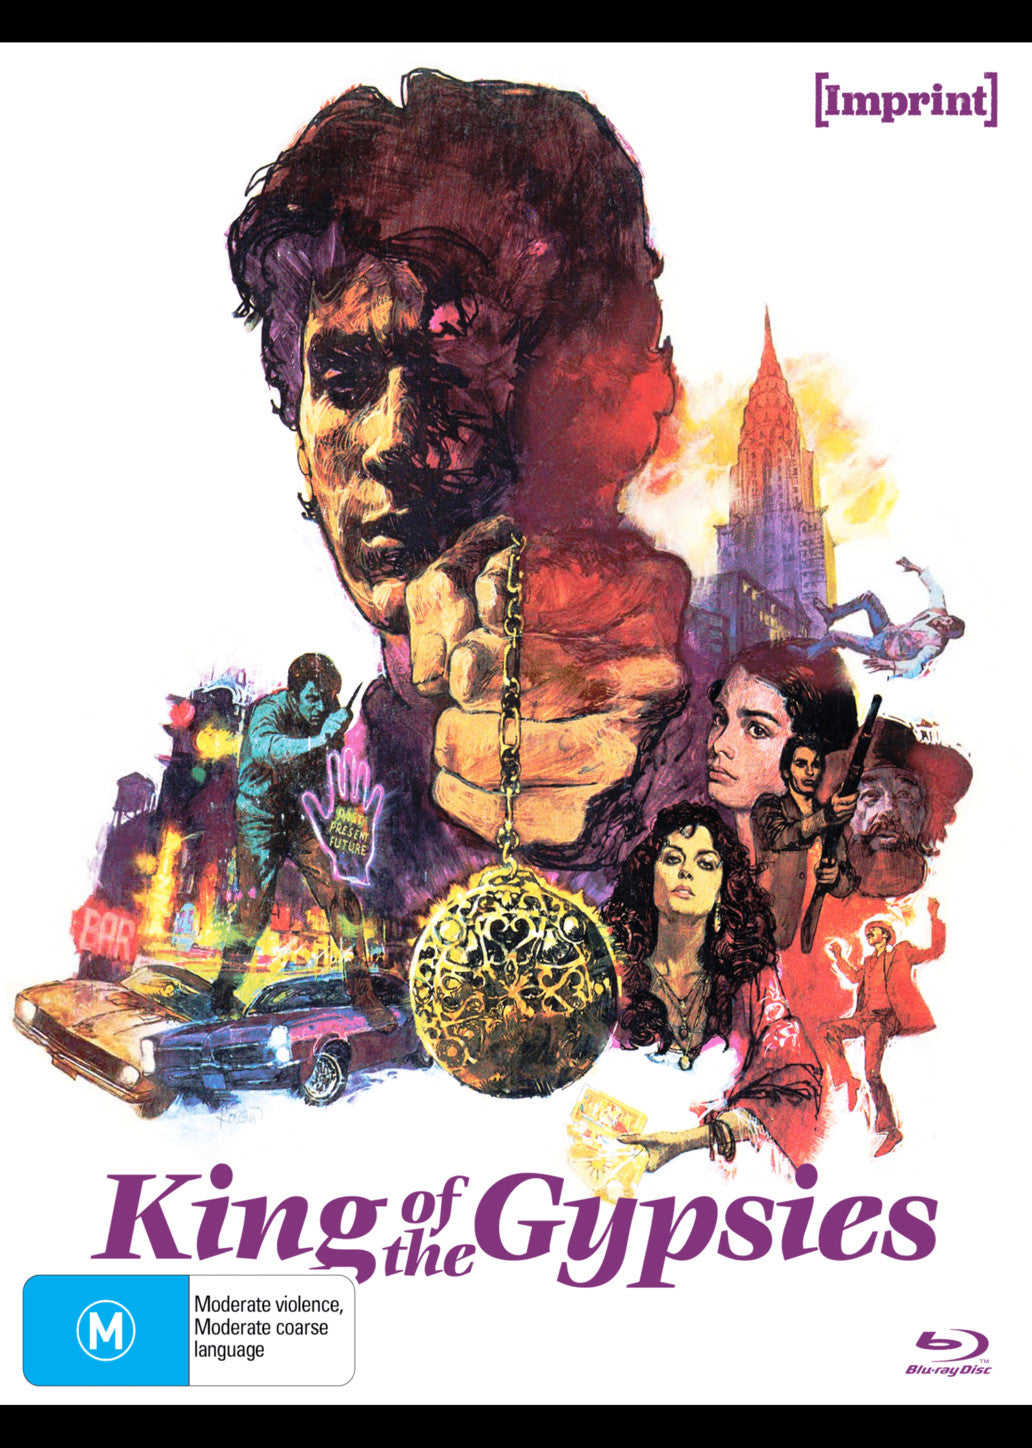 KING OF THE GYPSIES (IMPRINT COLLECTION #288)